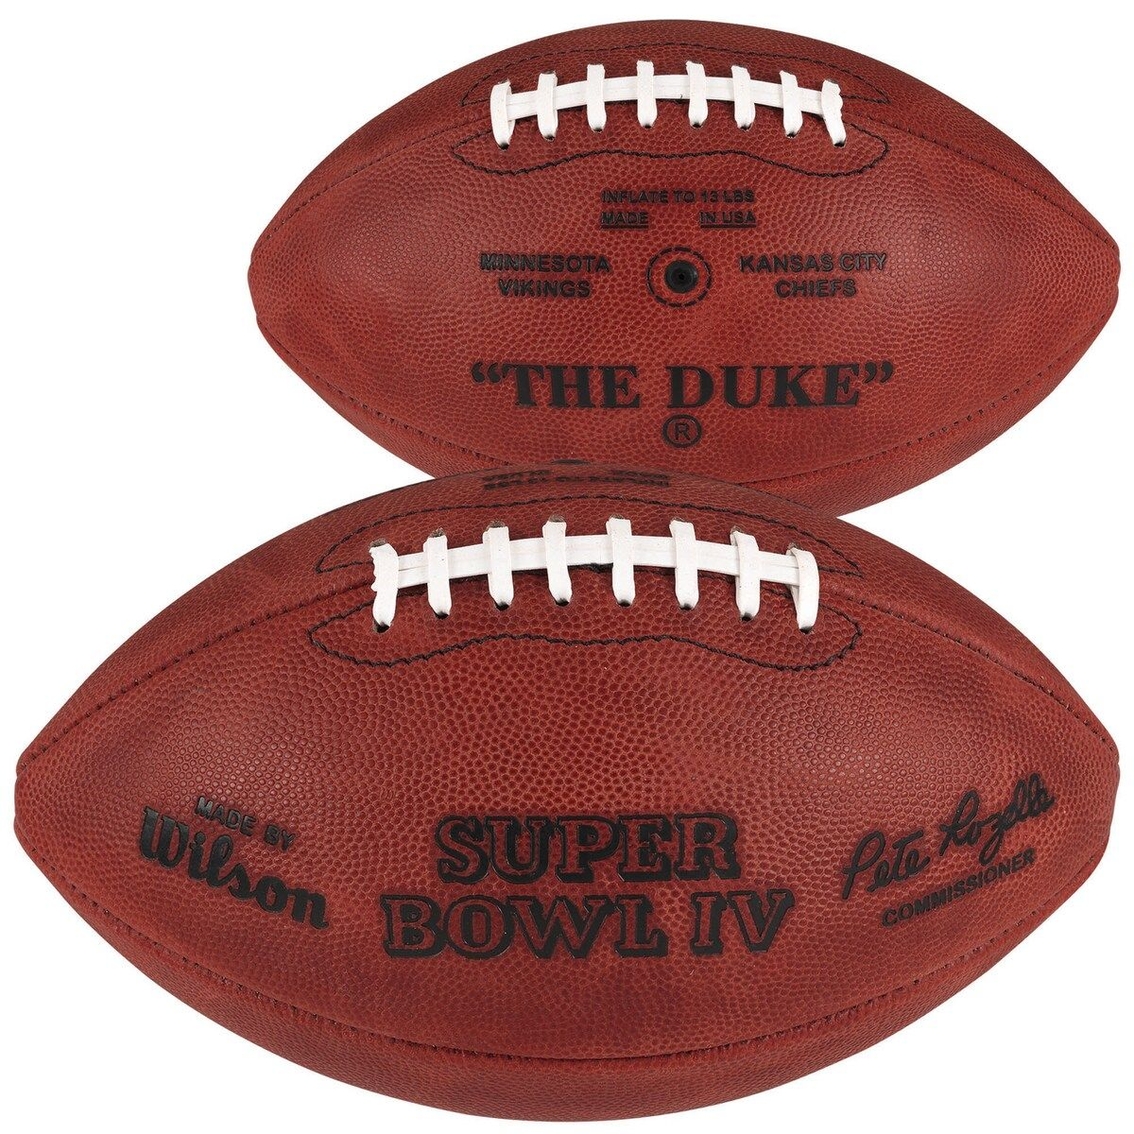 Wilson Super Bowl IV Wilson Official Game Football - Image 2 of 2